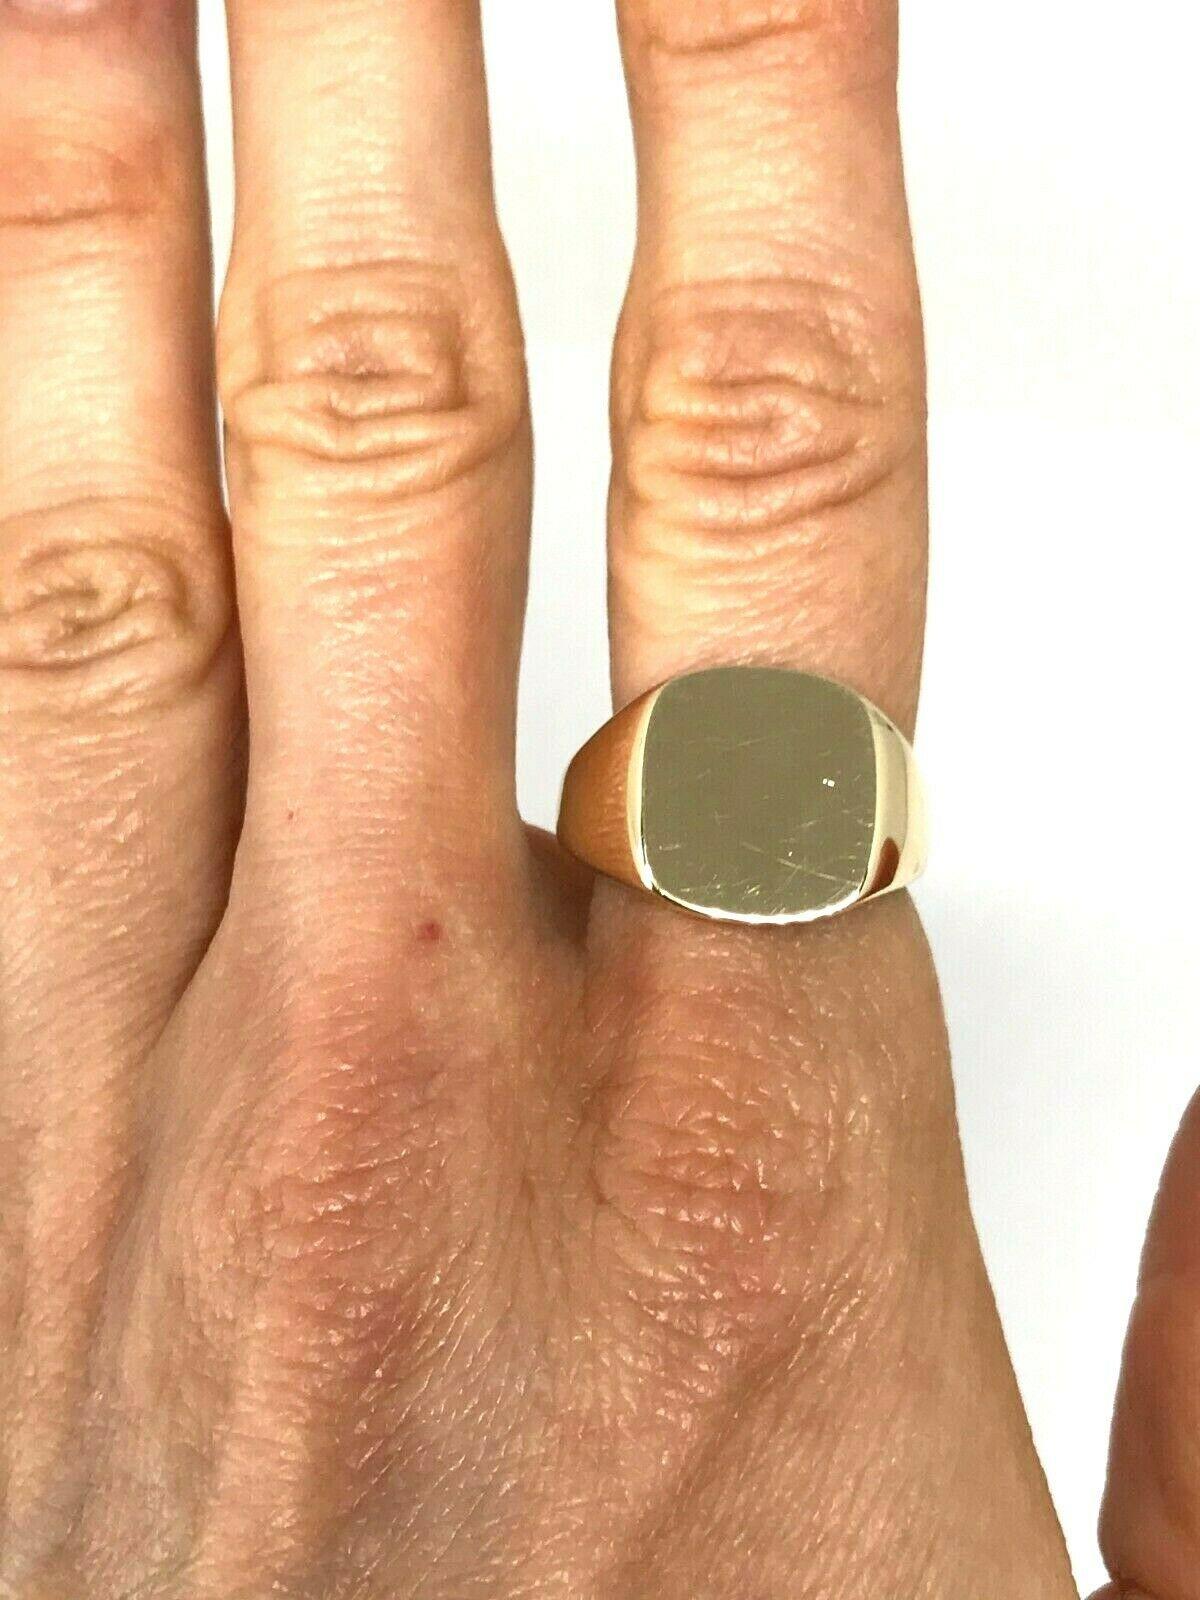 Tiffany & Co. signet ring made of 14k polished yellow gold, circa 1960s. 
Measurements: the ring size is 8.25. The signet is 5/8 H x 5/8 W, shank is 1/8